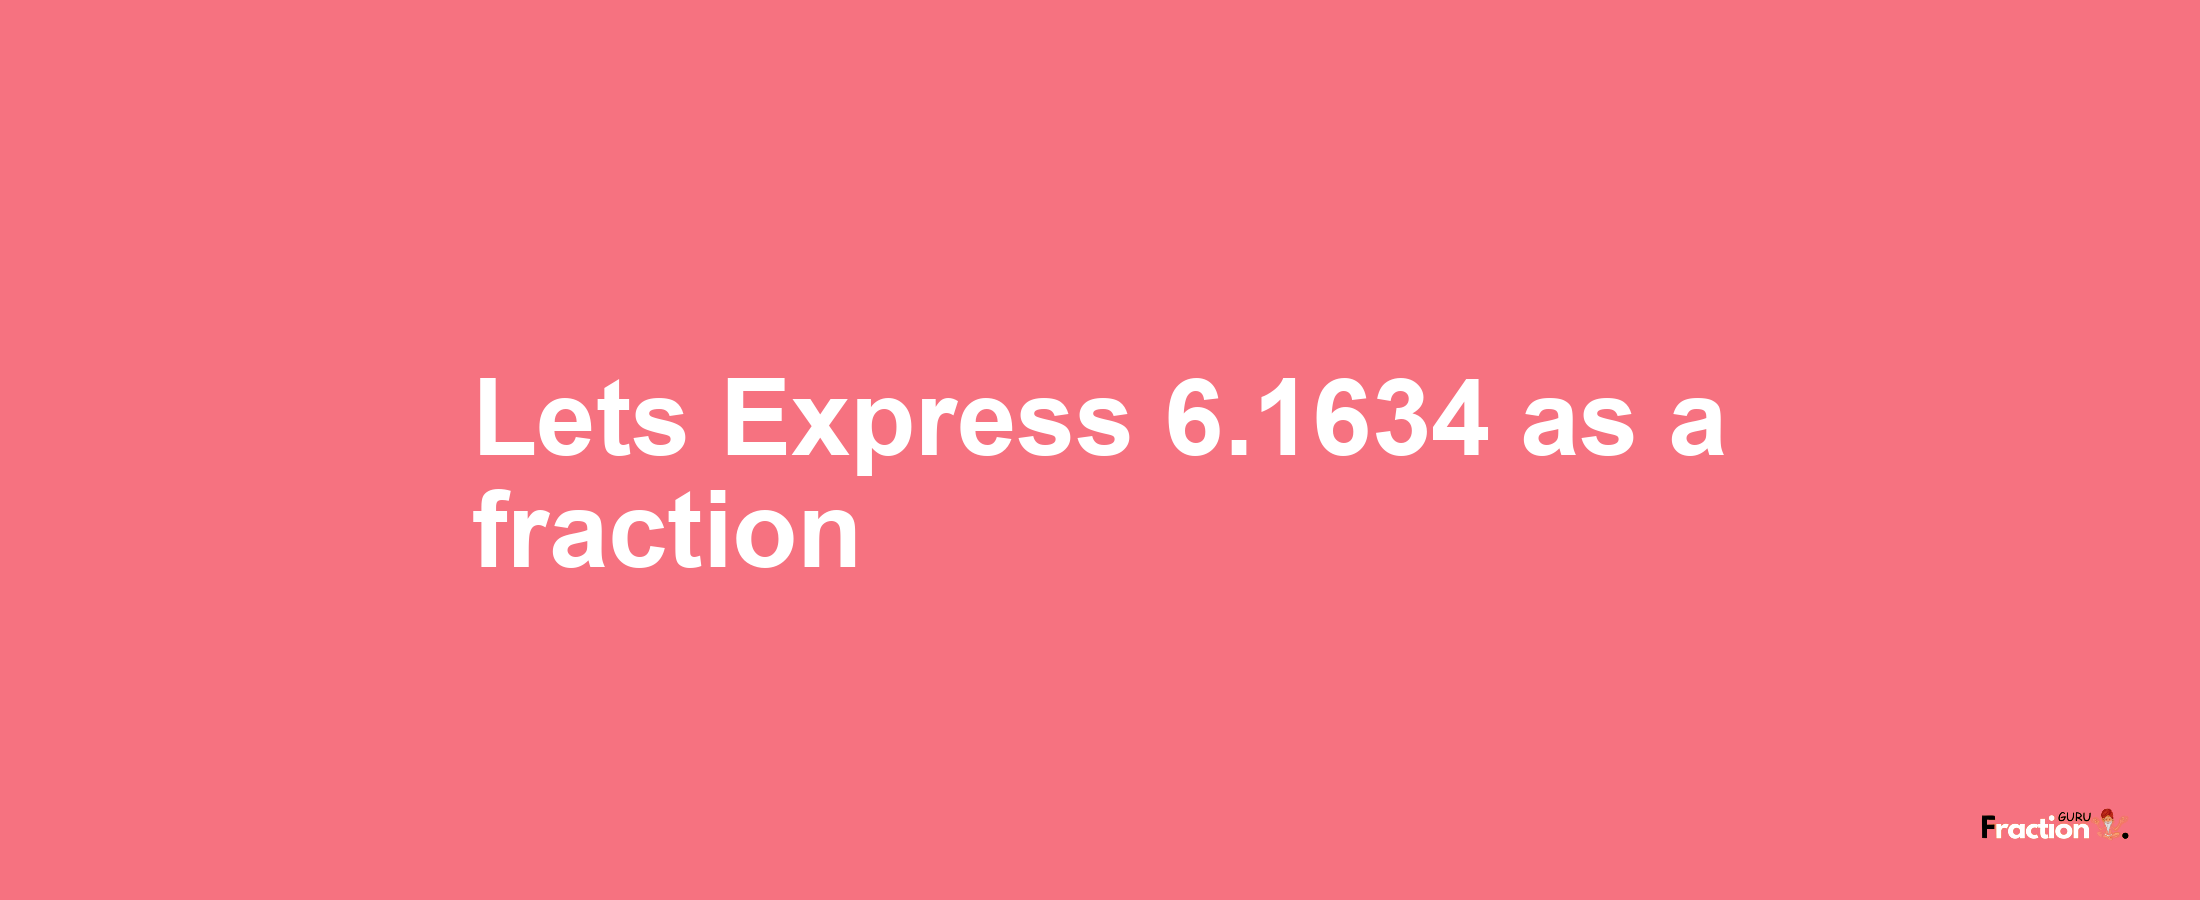 Lets Express 6.1634 as afraction